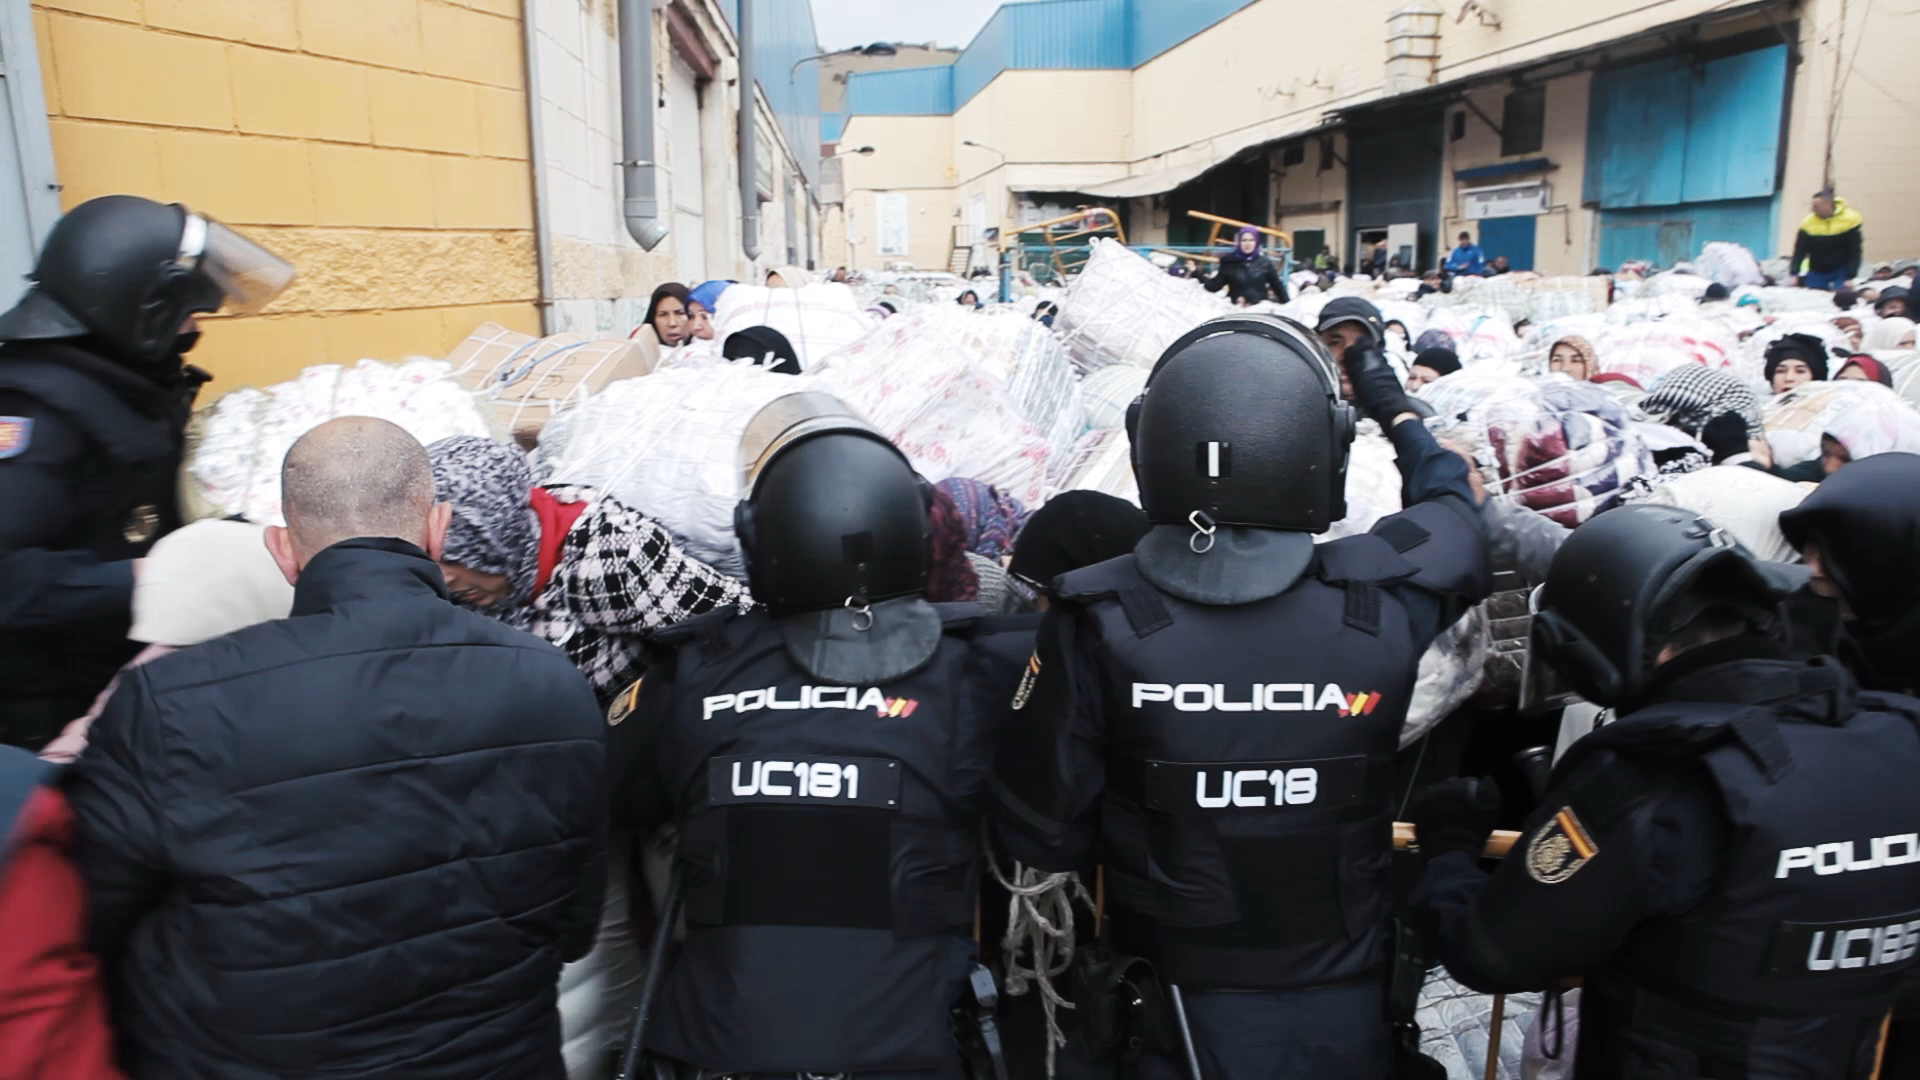 Police hold the surging crowd of women back at the border in Ceuta